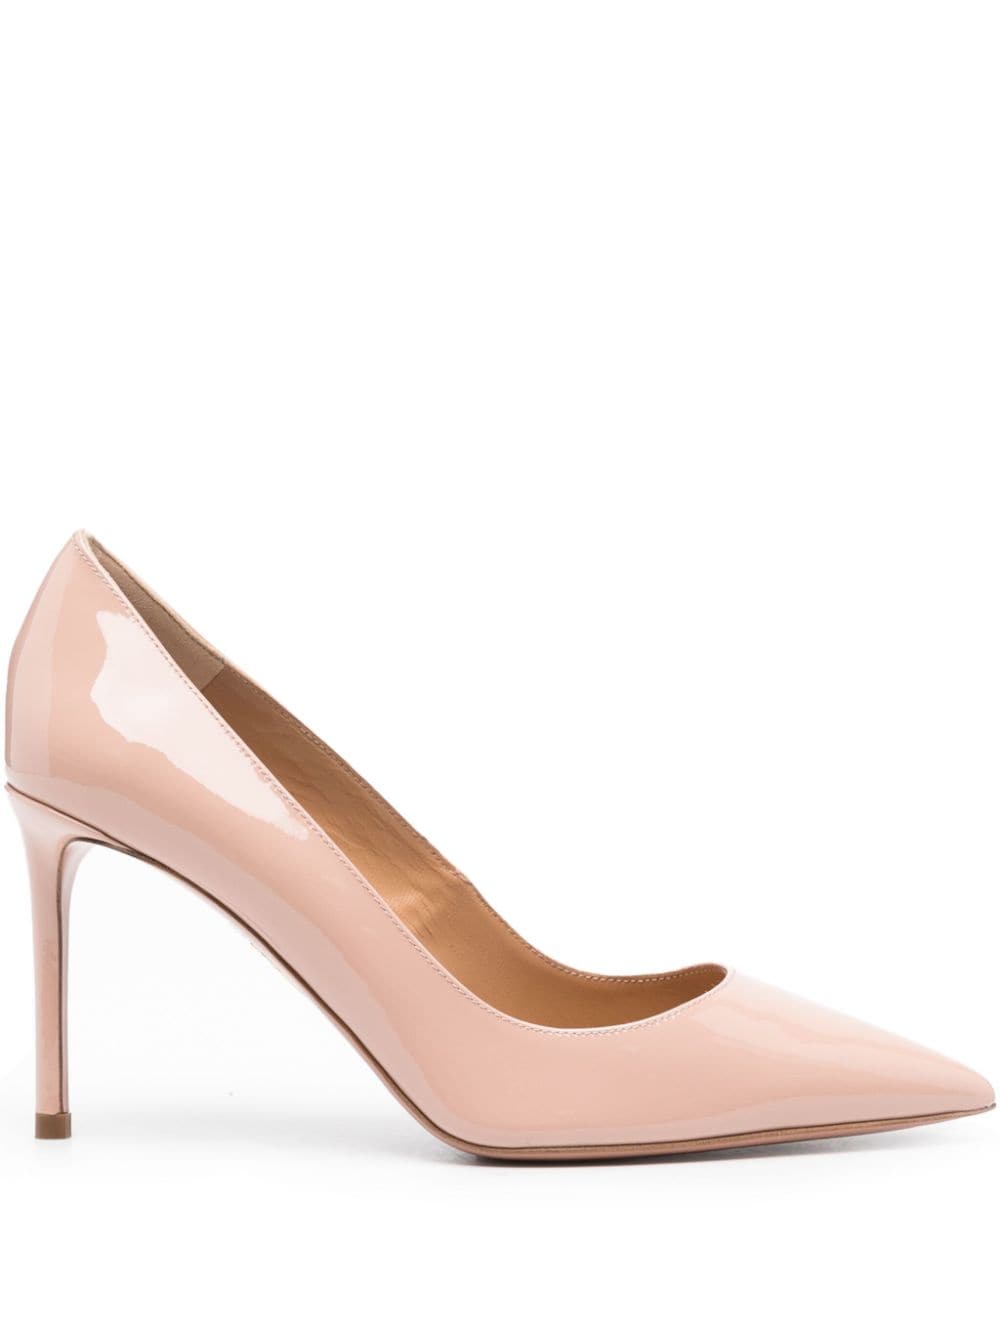 Purist 105mm leather pumps